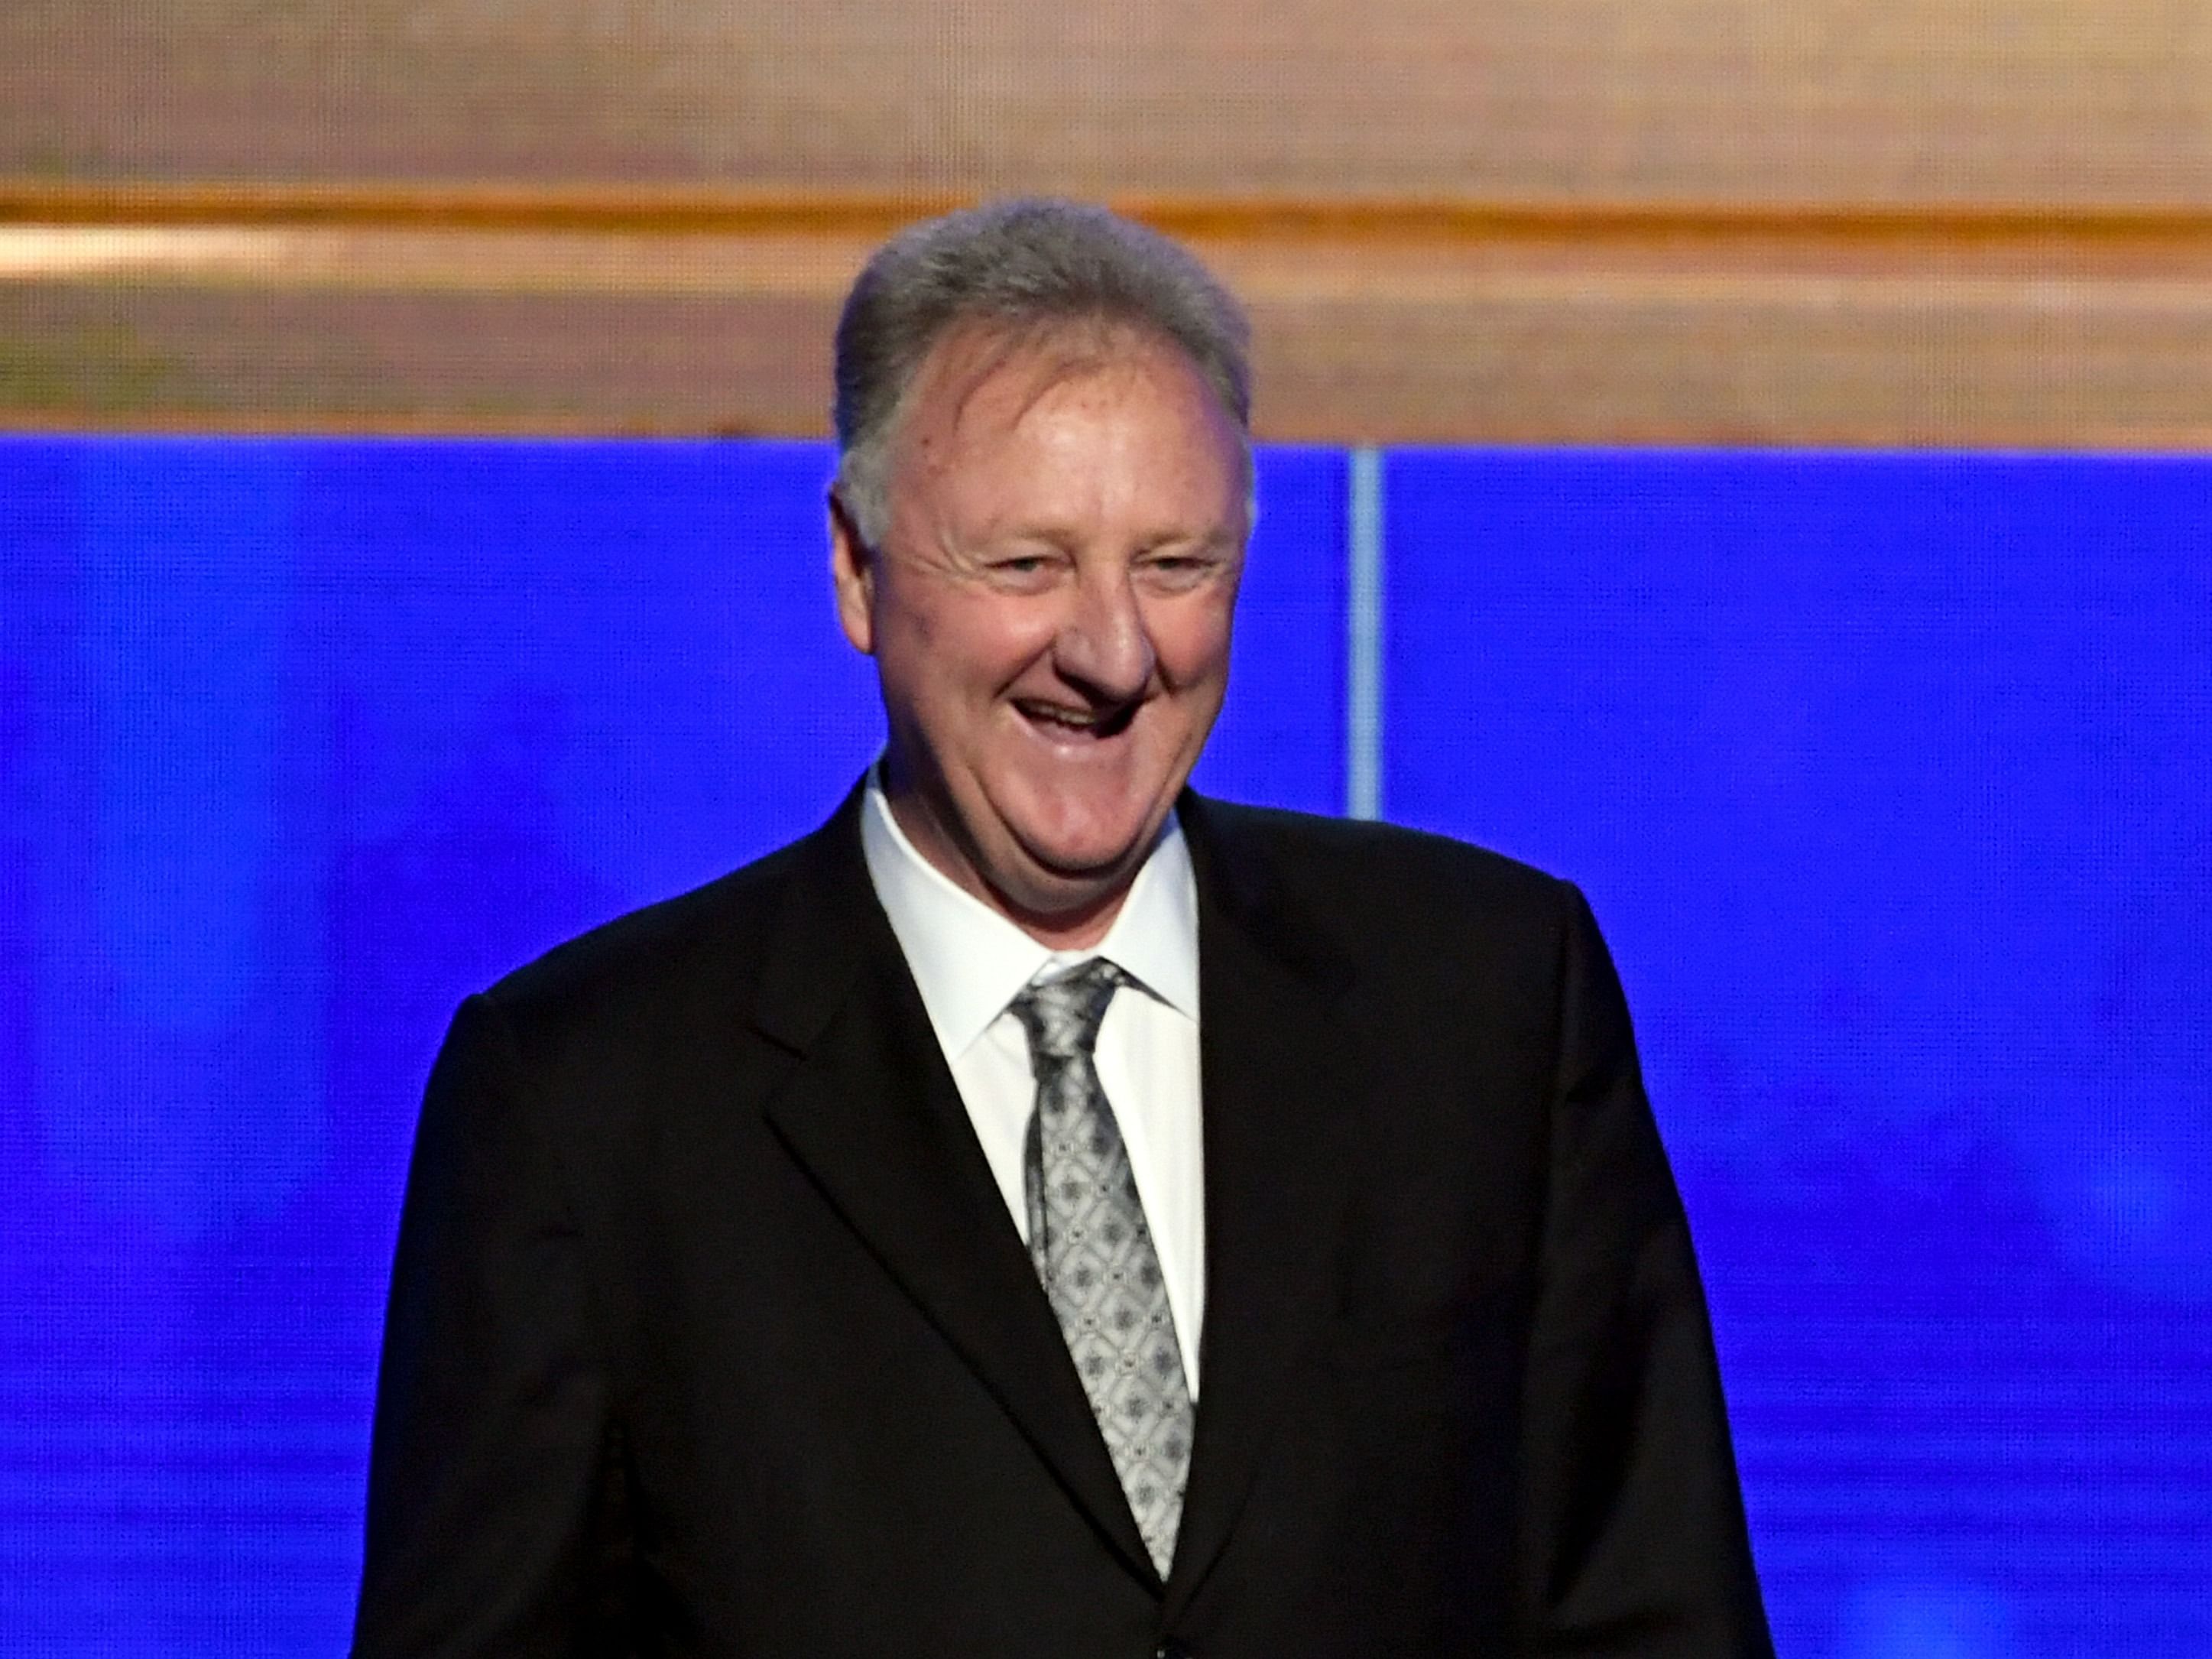 Larry Bird at the 2019 NBA Awards Presented By Kia On TNT - Inside